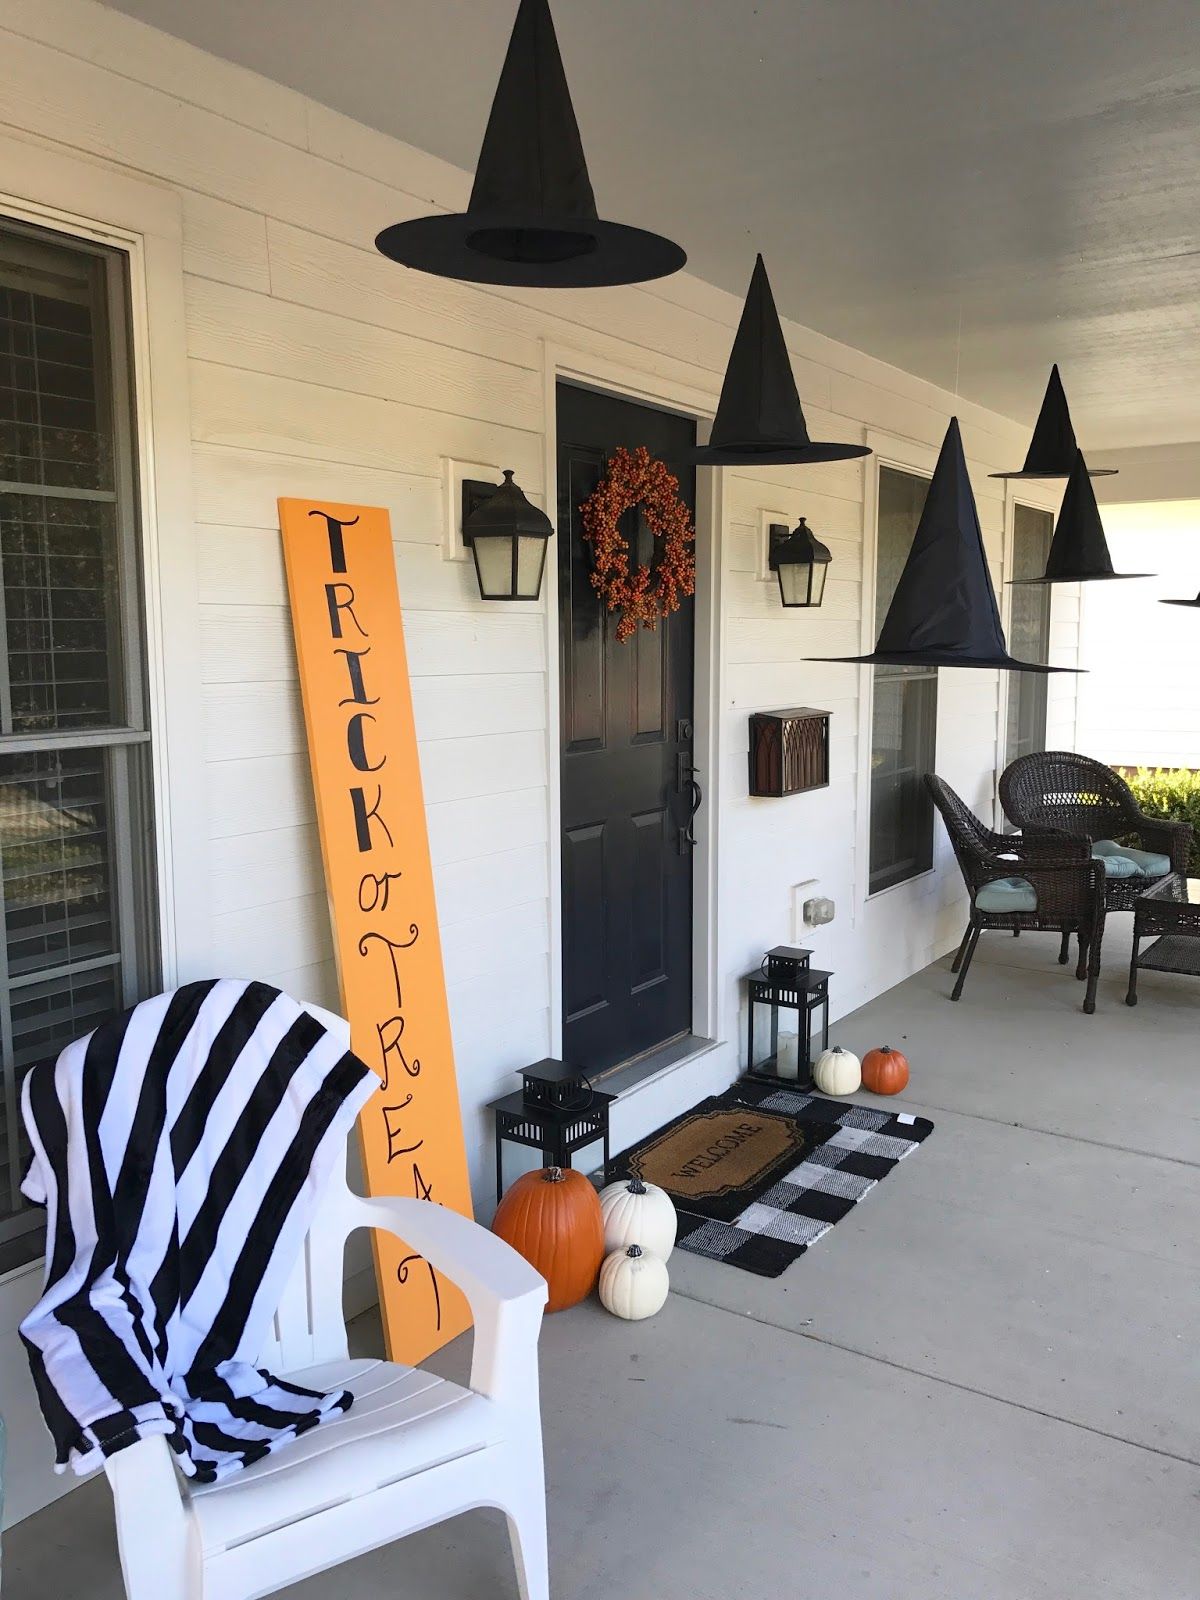 Simple-way-to-decorate-the-front-porch-for-Halloween-with-witch-hats-and-a-few-pumpkins-66365